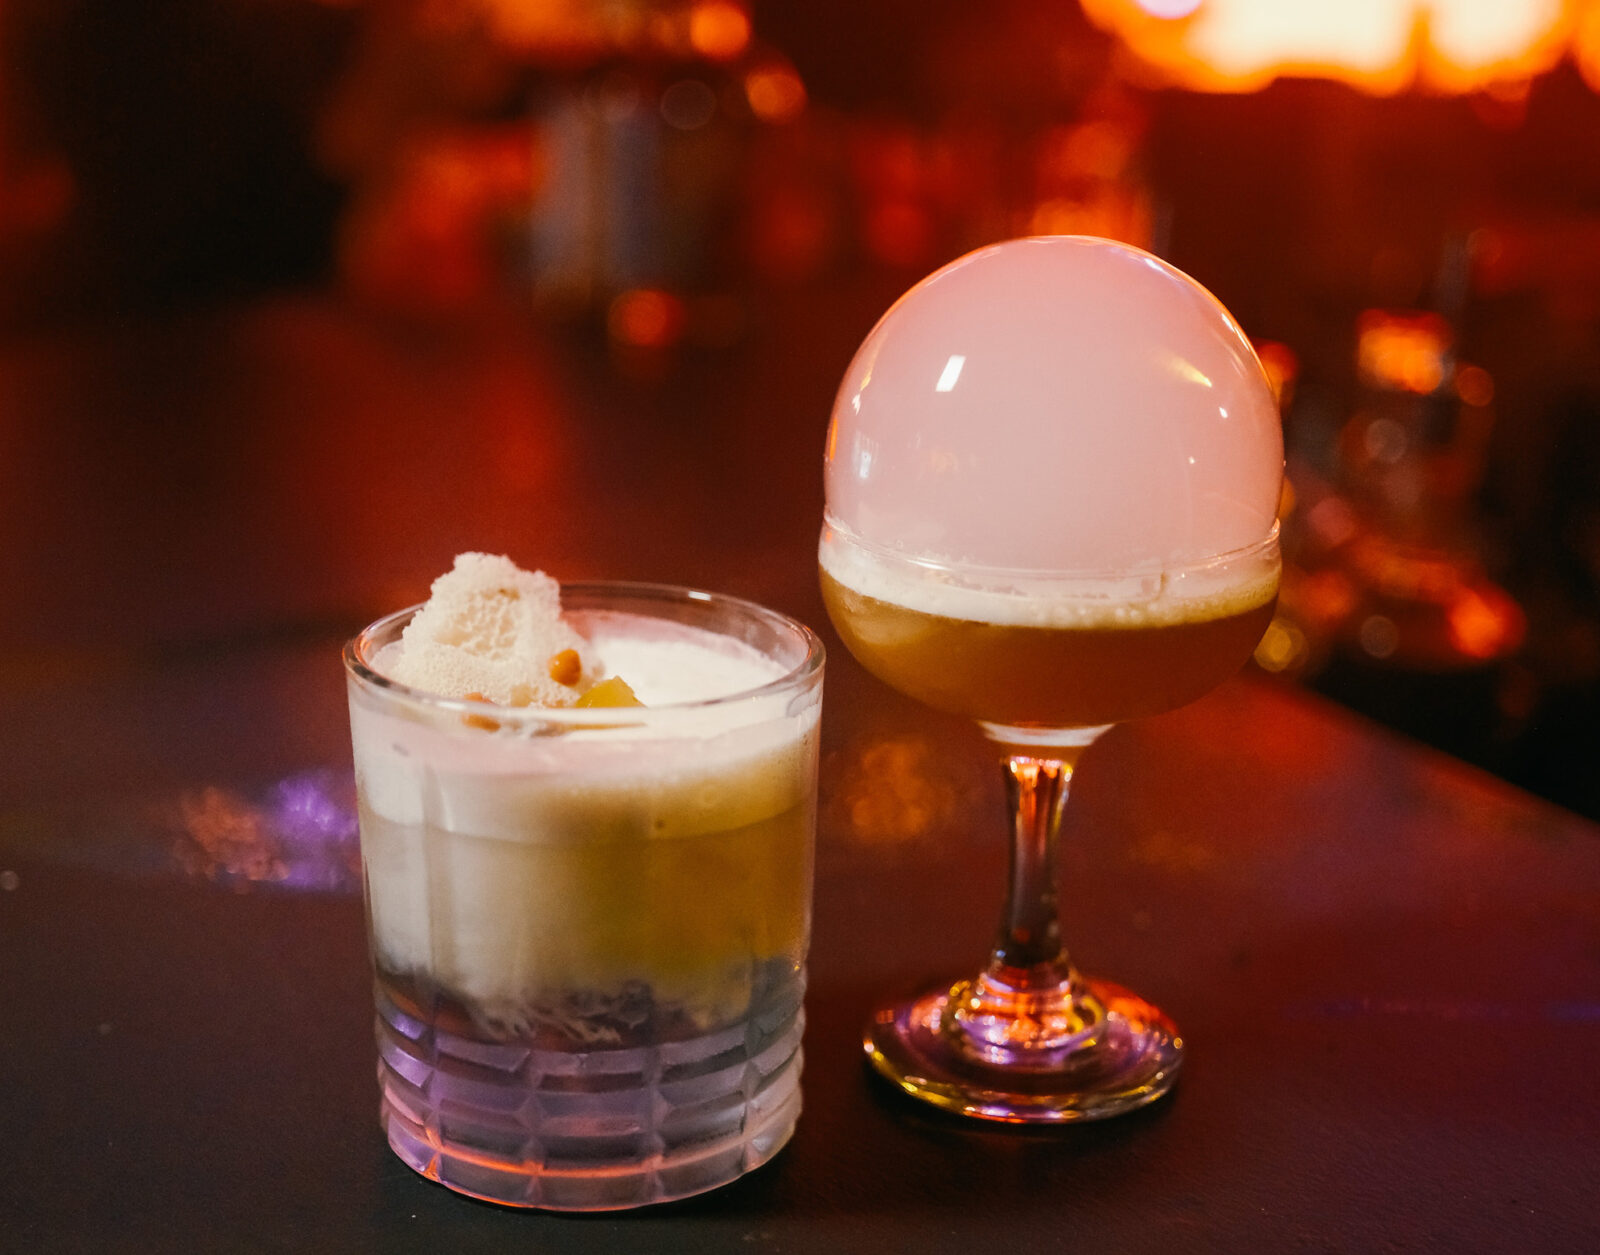 The two new specialty cocktails of Don Papa Rum, the Sugarlandia Sour and Merienda Colada